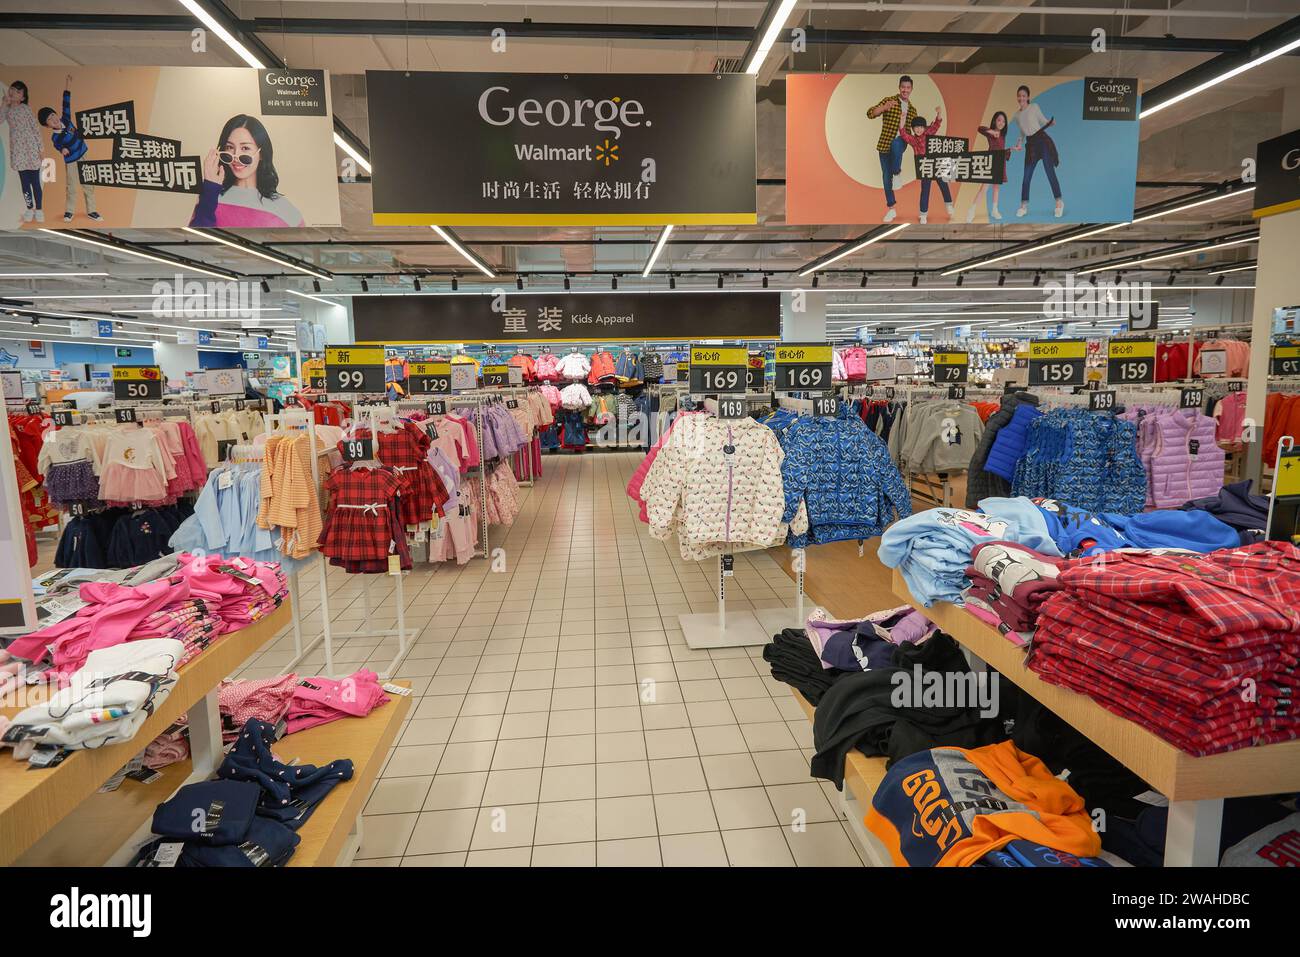 George range of women's clothing for sale in a Walmart supermarket